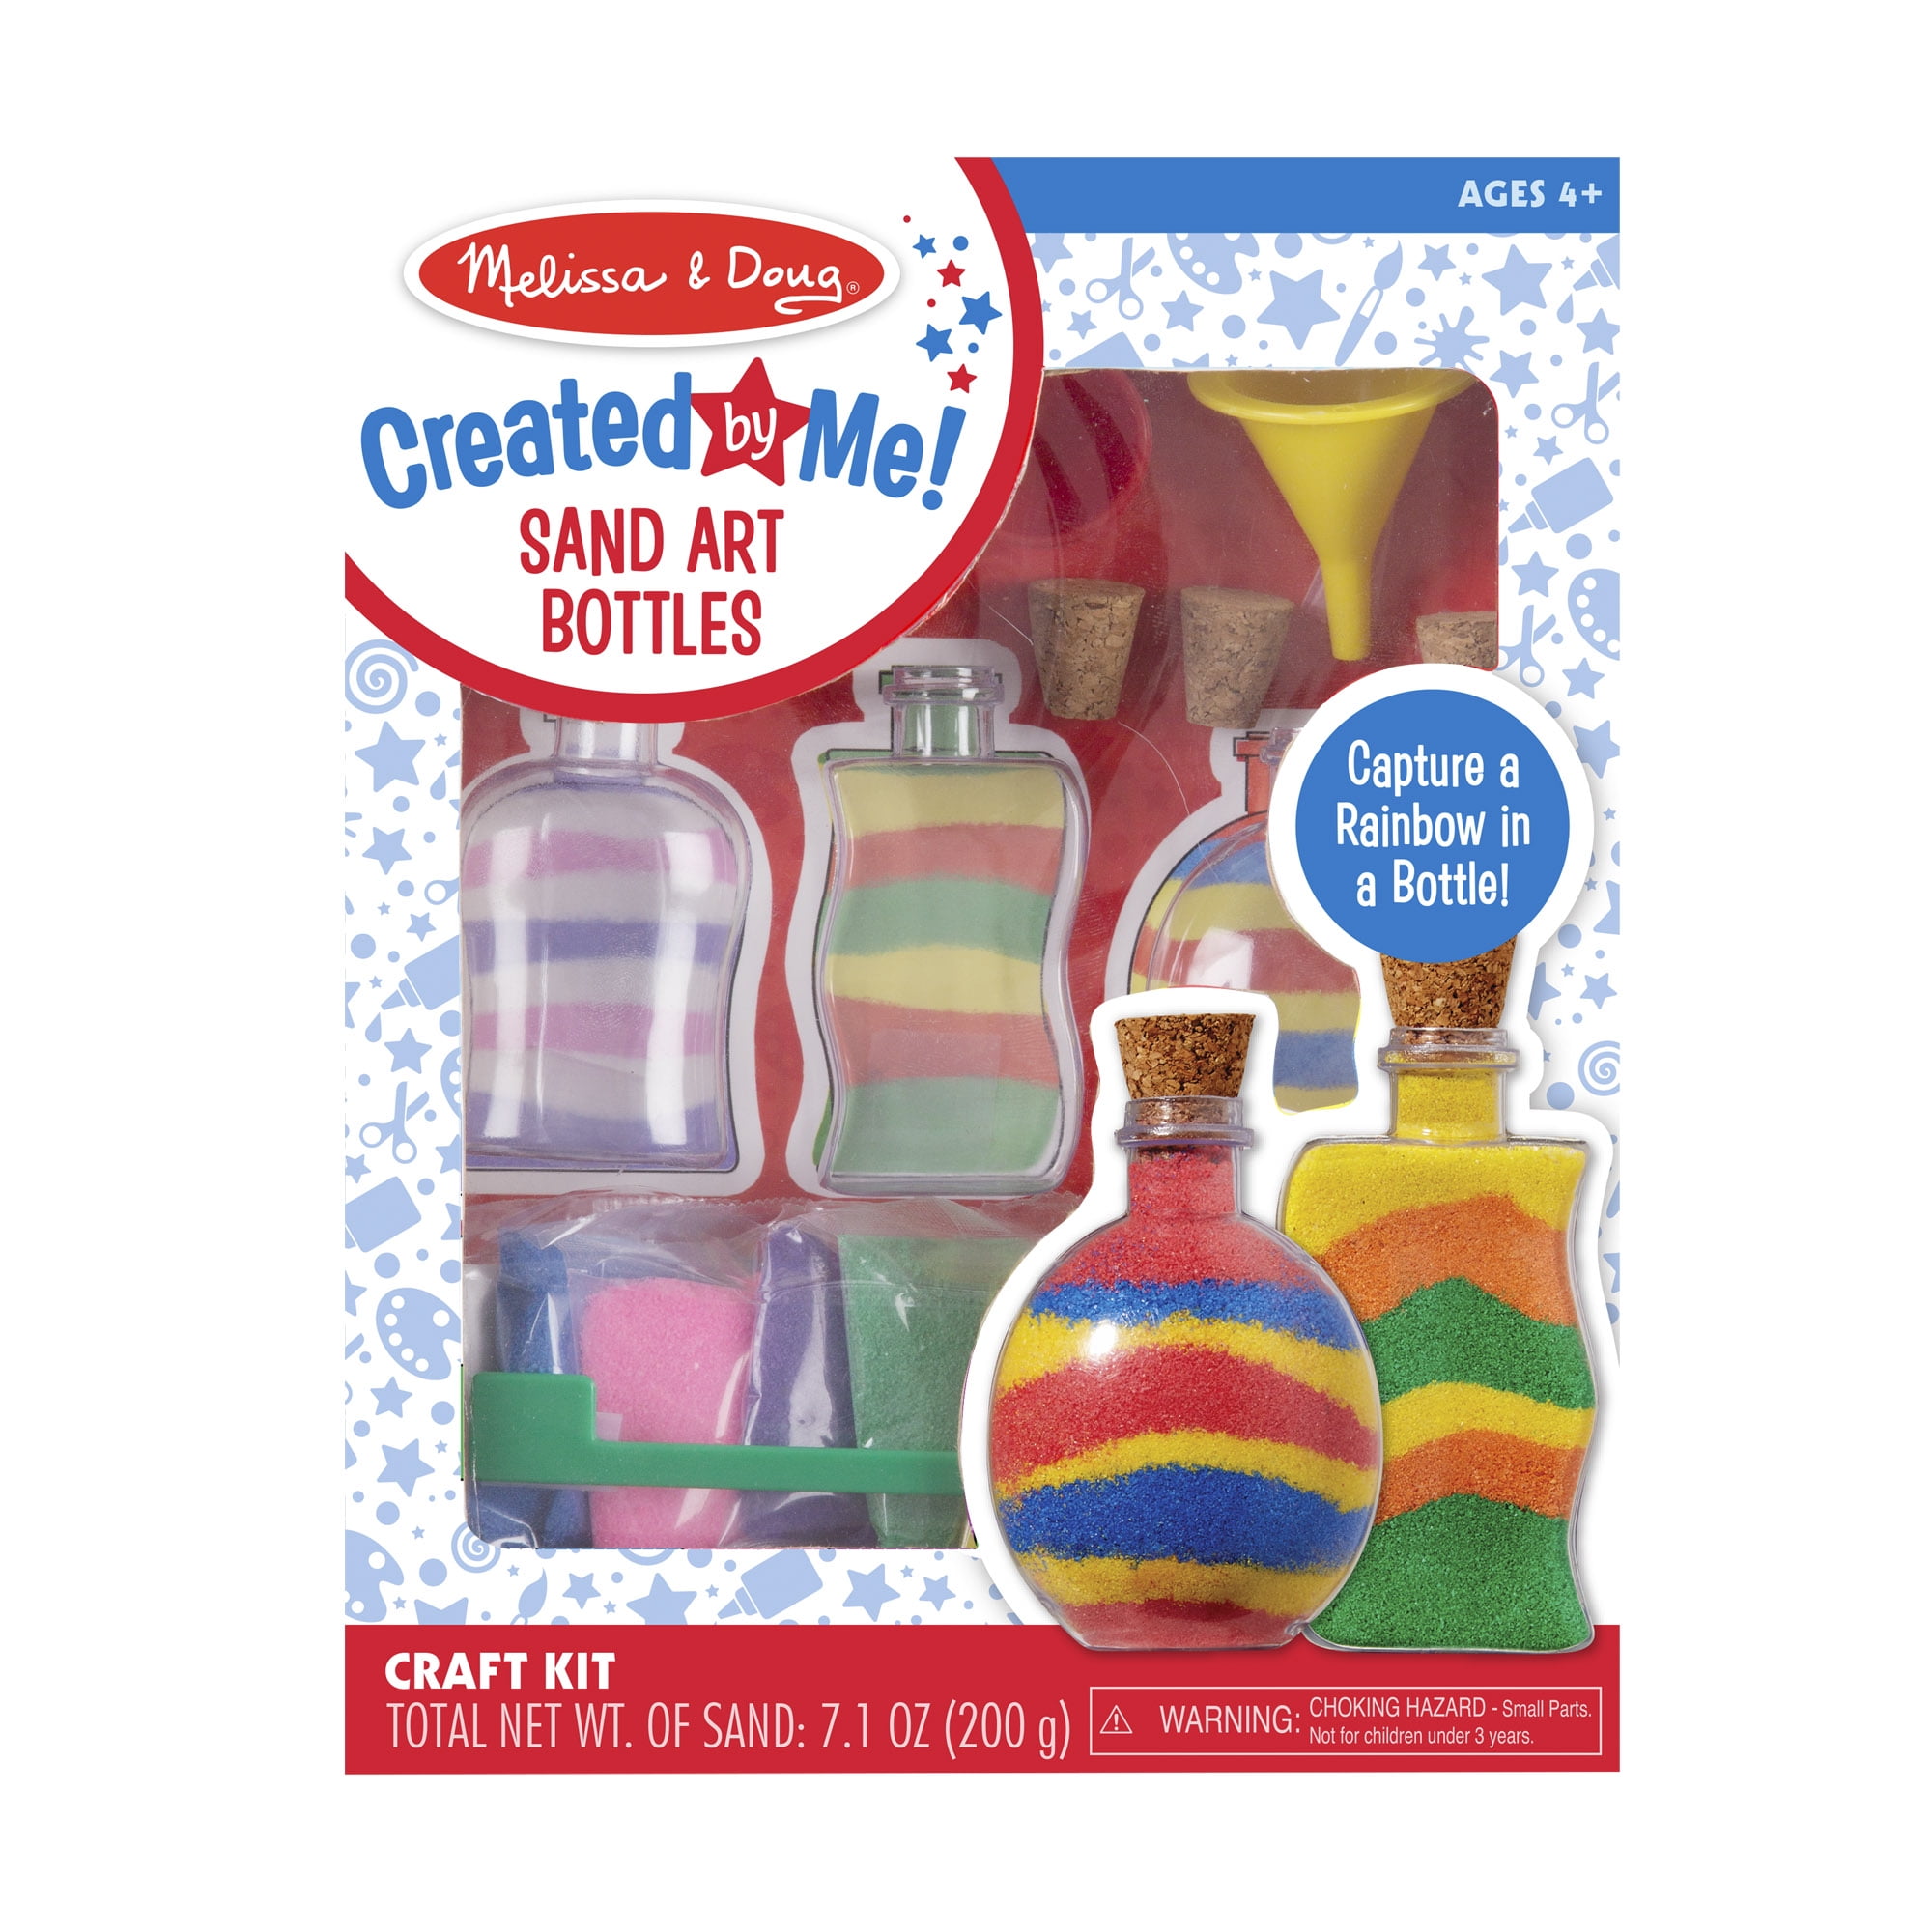 Sand Art Kit for Ages 3 to 10 - Everything Kids Need for Fun DIY Crafts -  16 Sand Peel&Sprinkle Pictures, 2 Sand Art Bottles, 8 Jars of Colored Sand